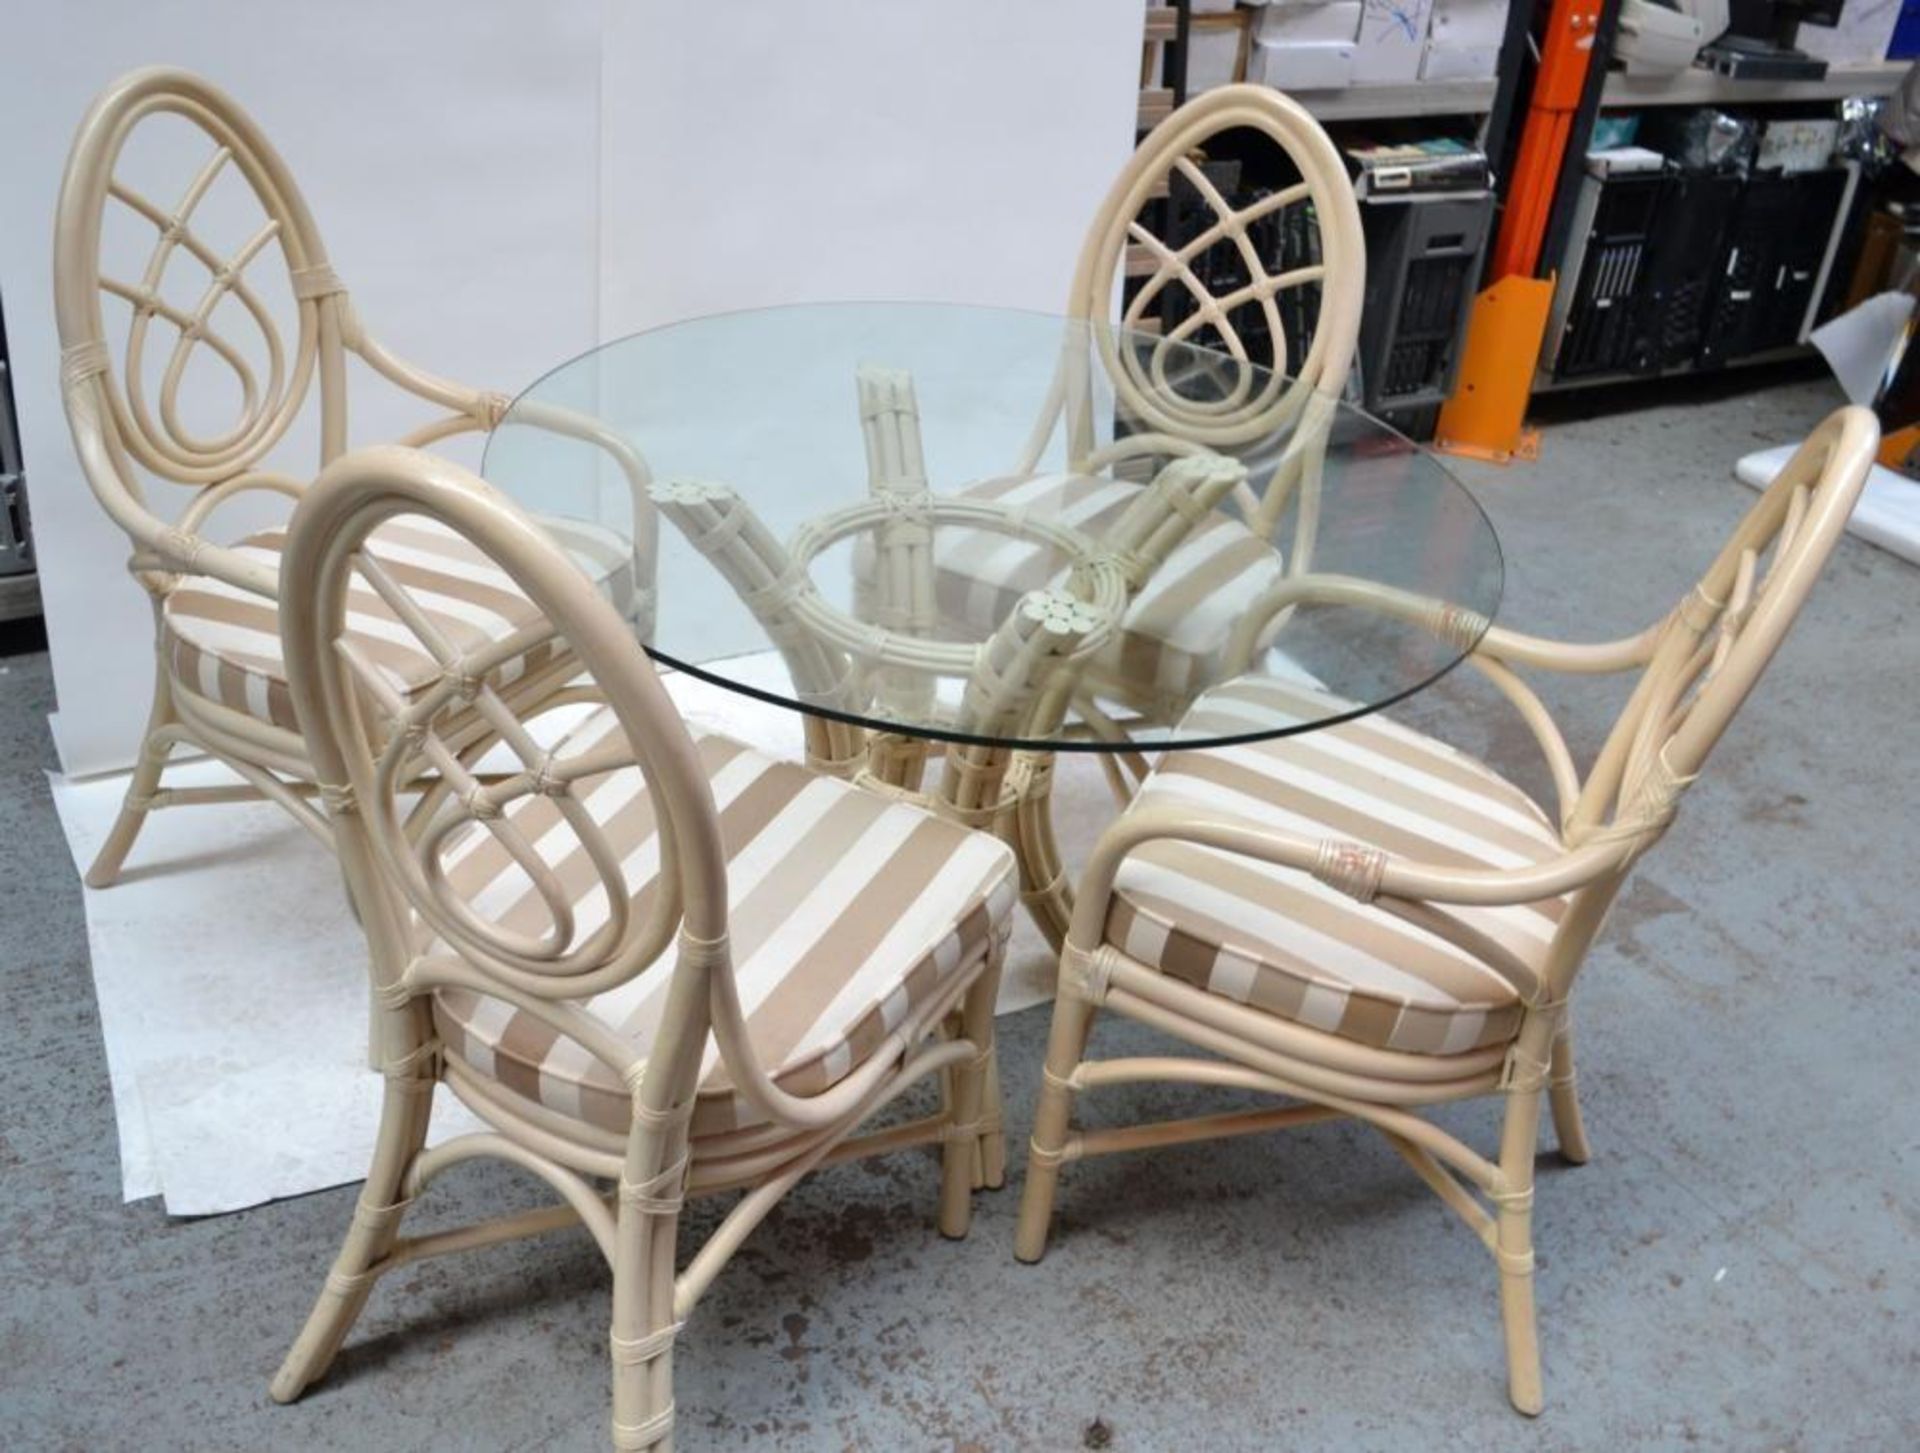 1 x Glass Topped Cane Table with 4 Chairs - Pre-owned In Good Condition - AE010 - CL007 -